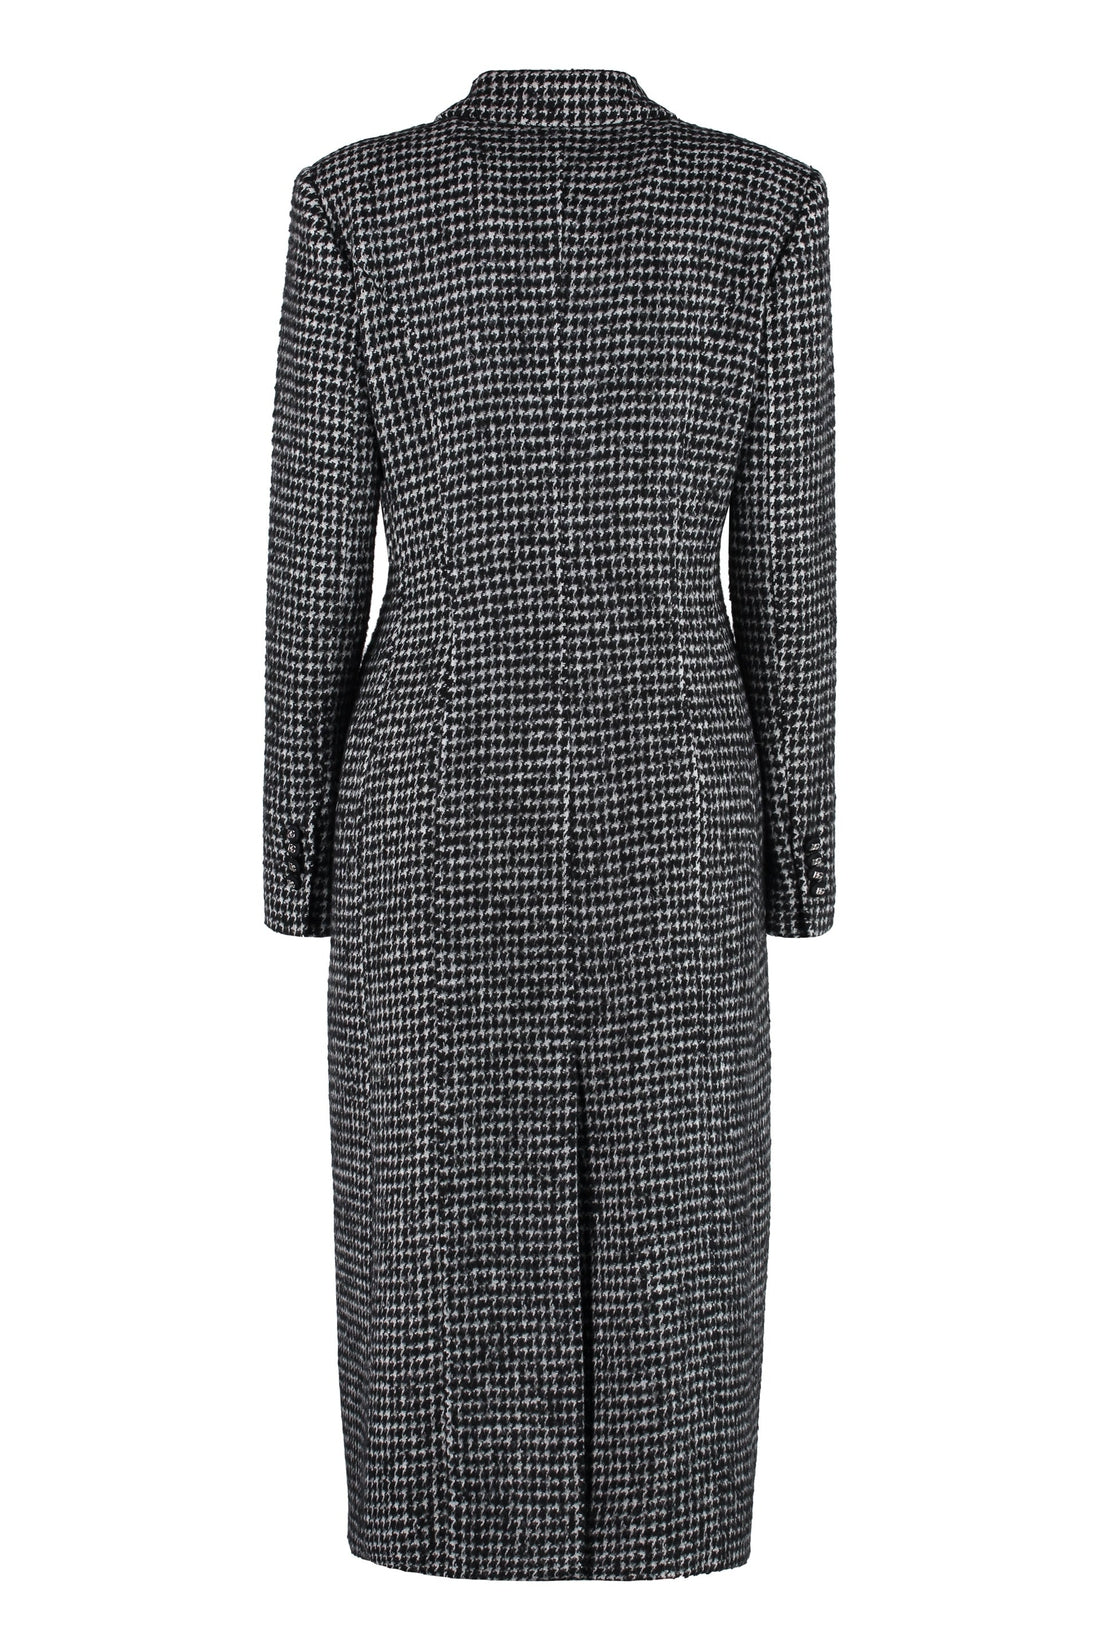 Dolce & Gabbana-OUTLET-SALE-Houndstooth double-breasted coat-ARCHIVIST